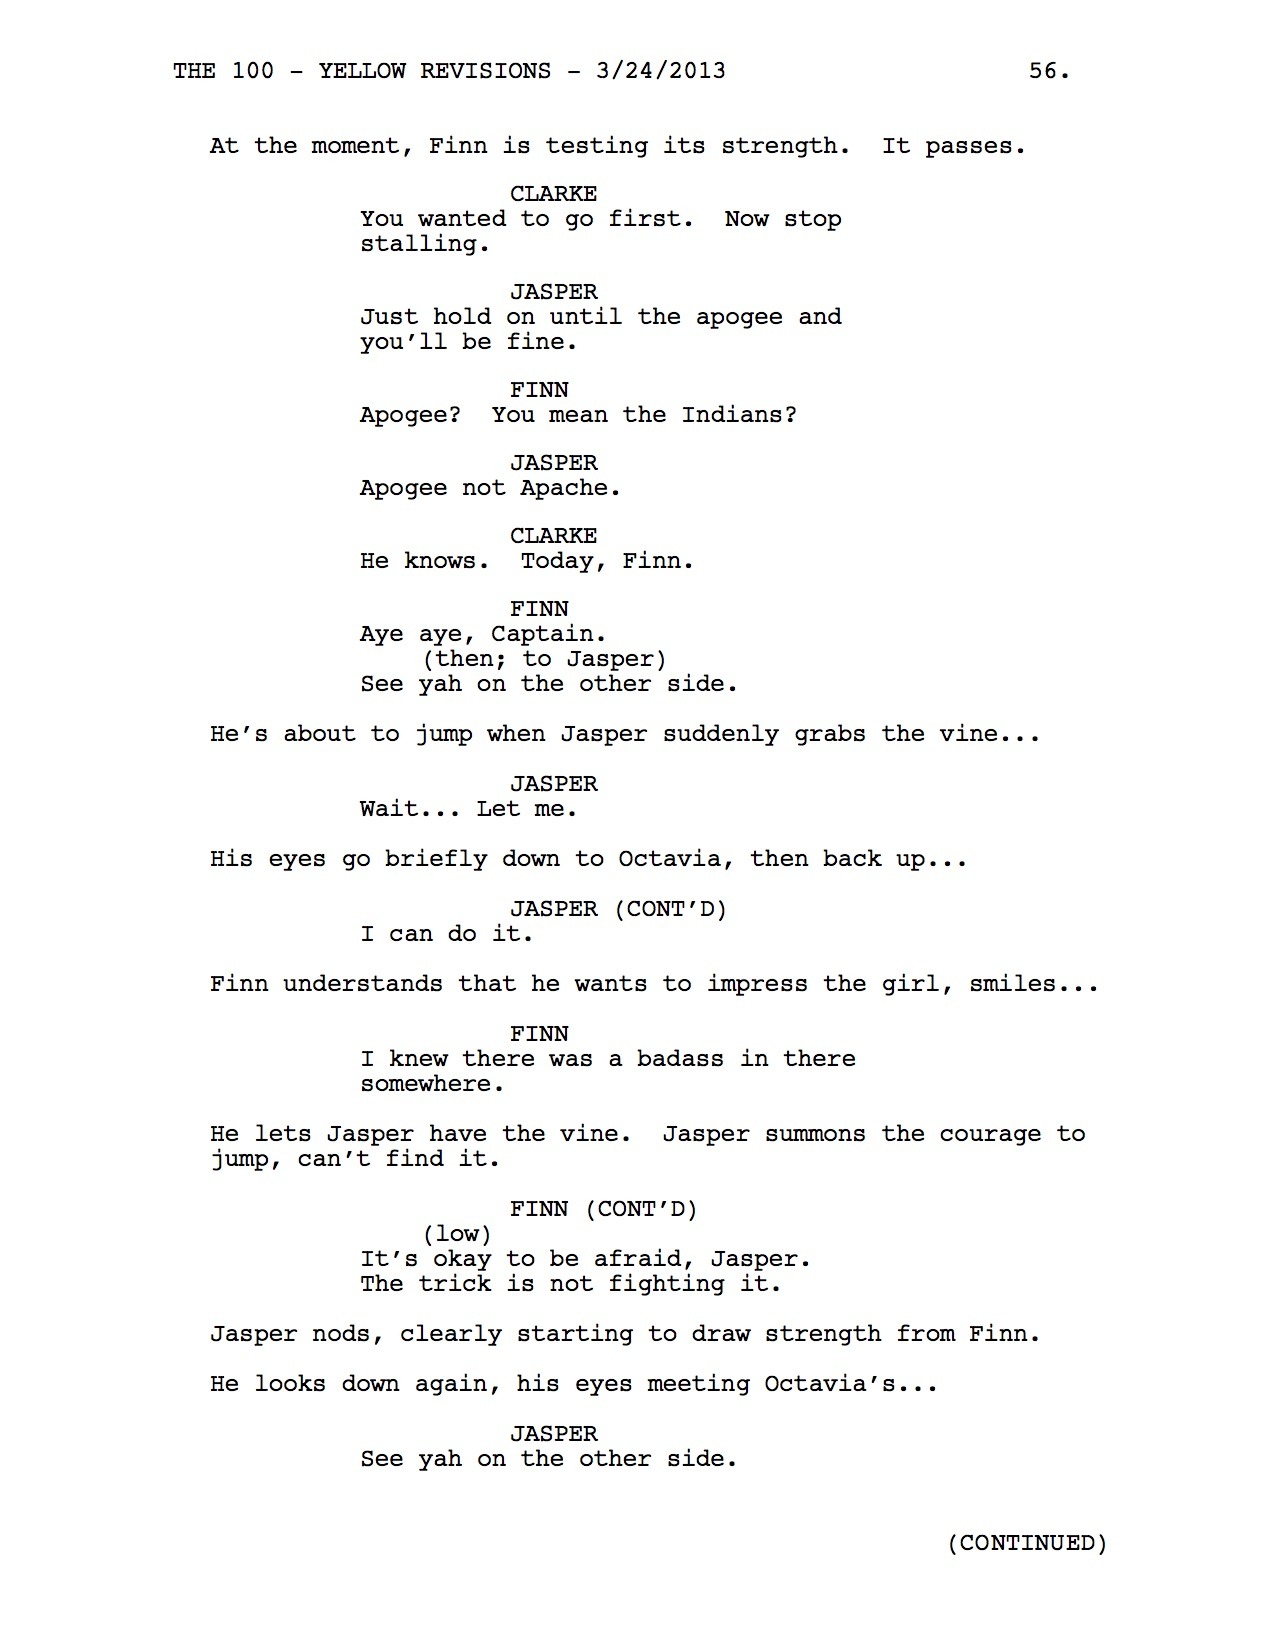 Hope you’re ready for the next scene because it’s coming your way.  From “Pilot”